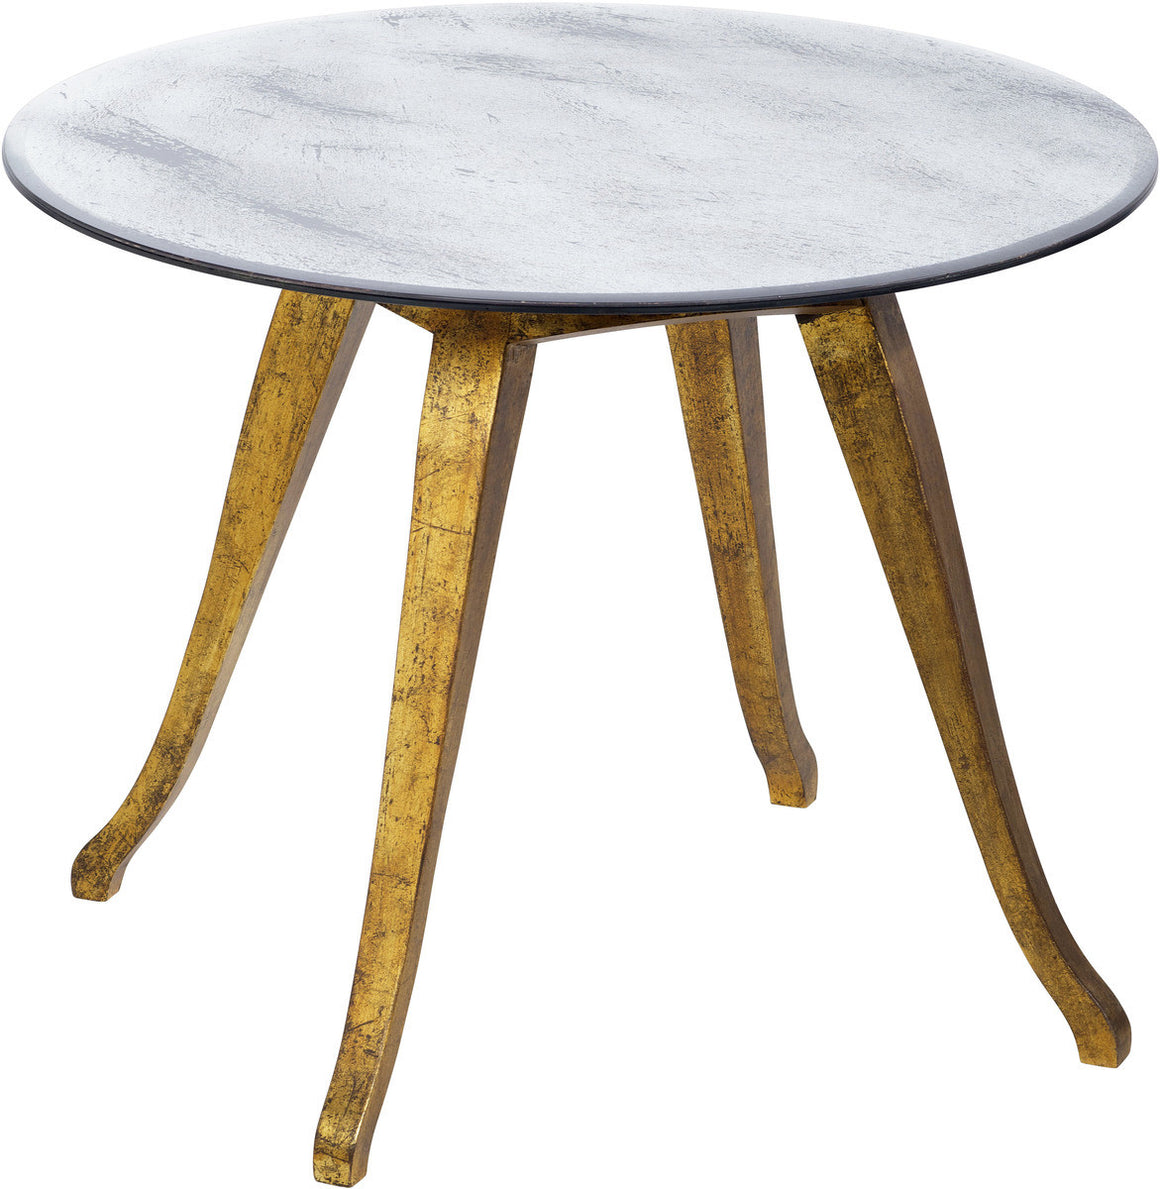 Antique Style Round Mirror Table